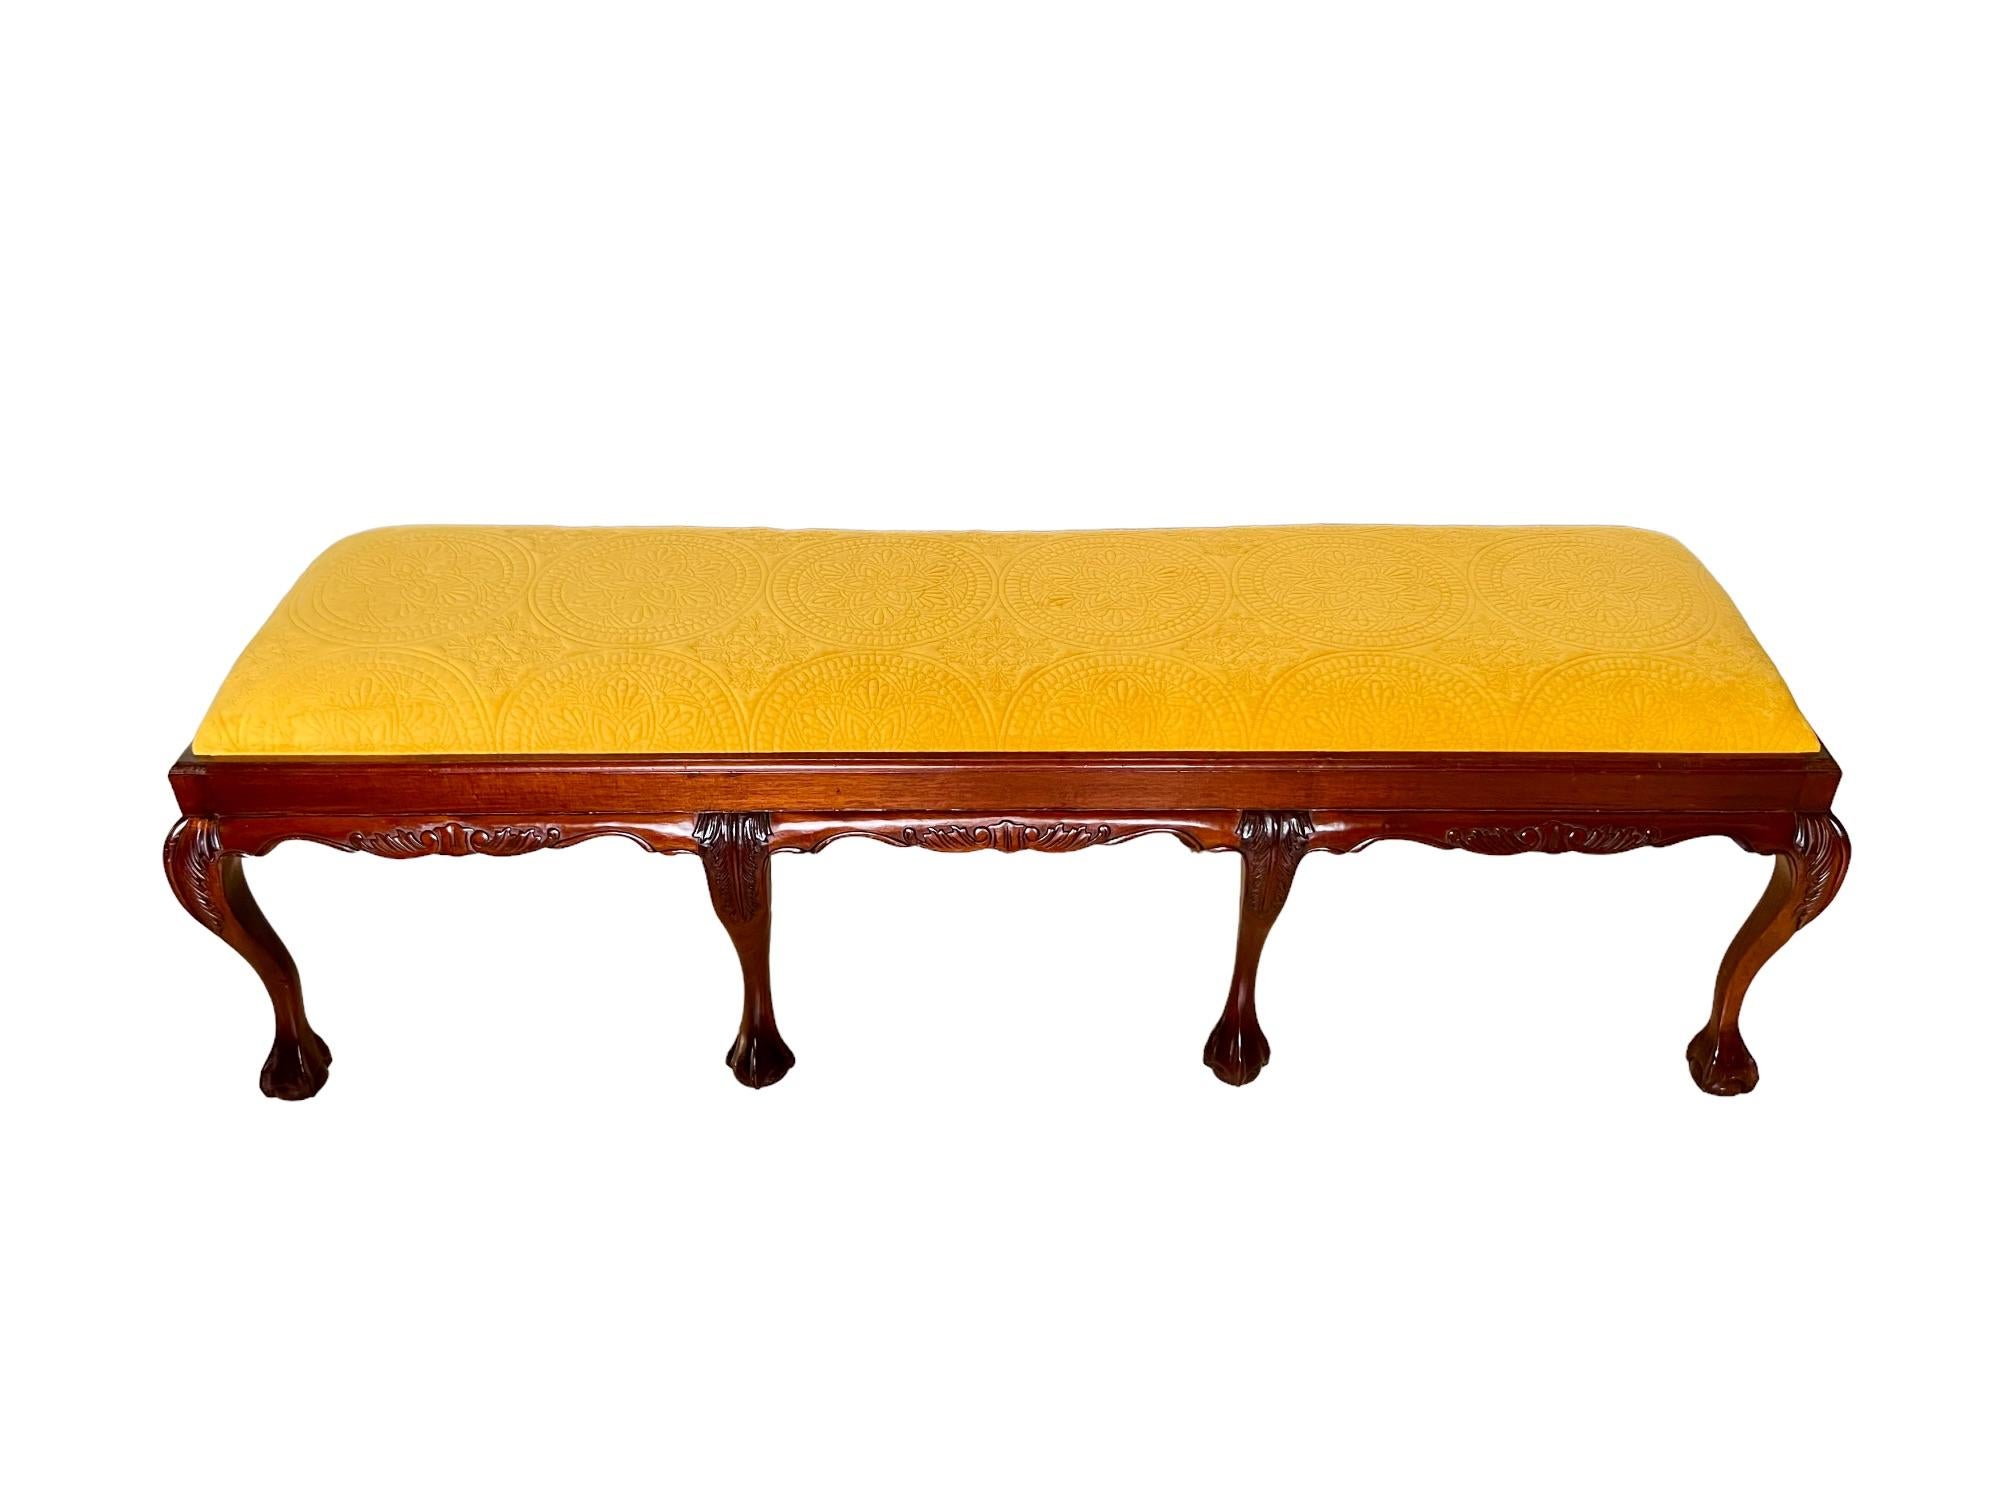 A late 20th century Chippendale style upholstered eight leg bench. Carved mahogany frame featuring a scalloped edge apron and cabriole legs with ball & claw feet. Recovered in a mustard yellow medallion tufted velvet.

Dimensions: 68